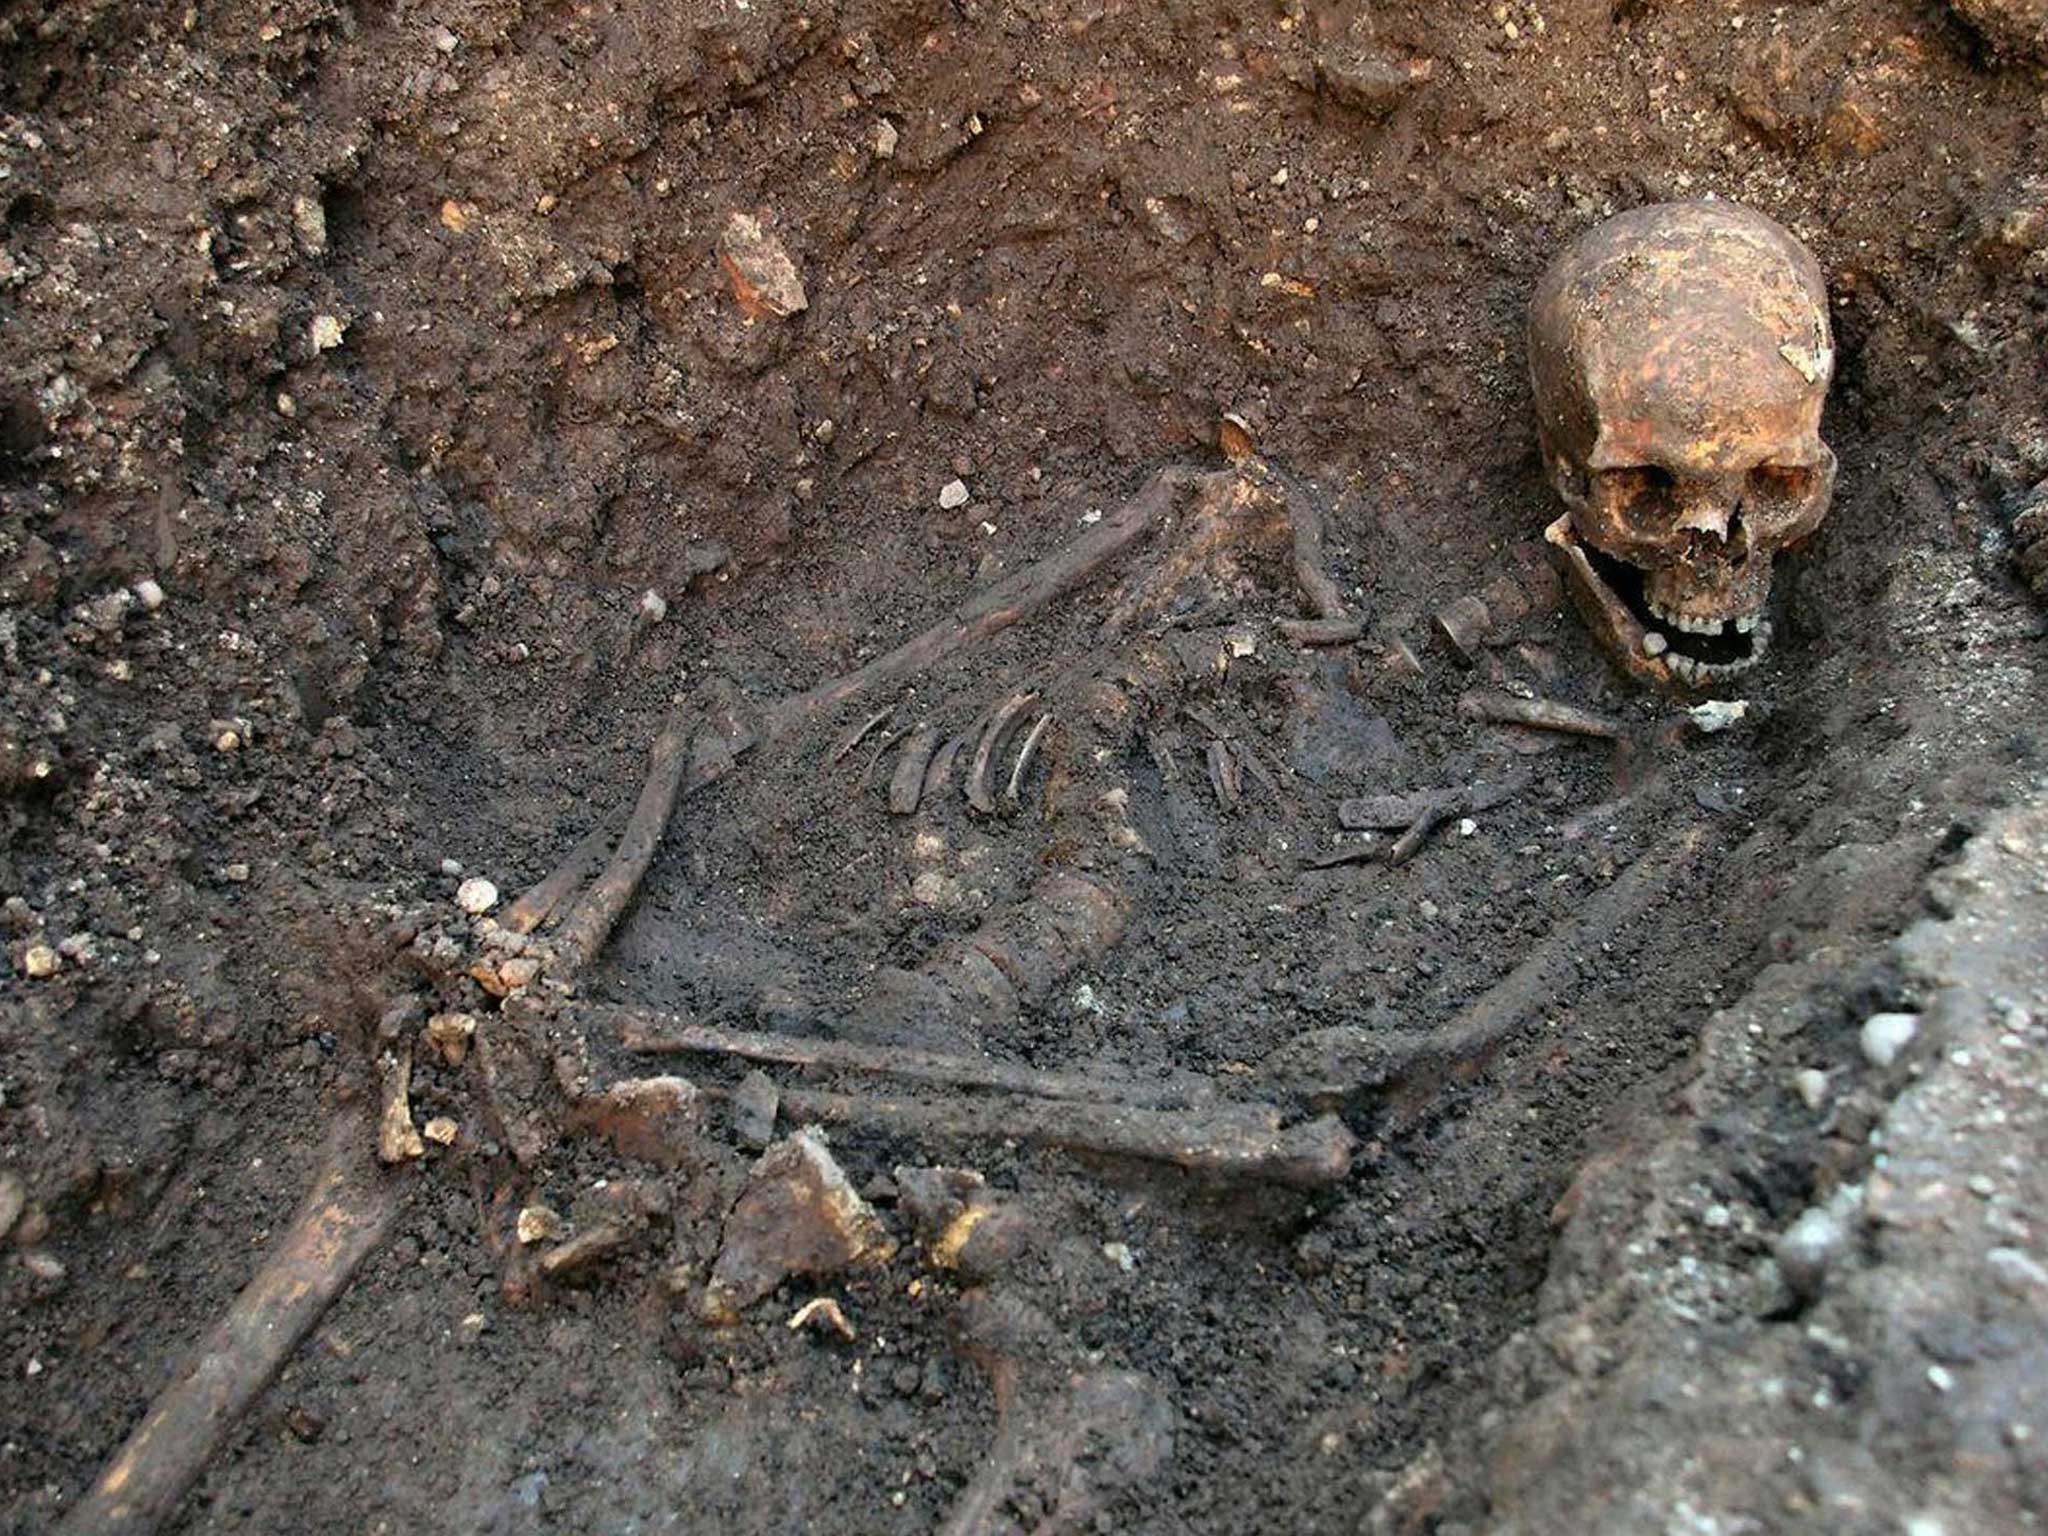 The remains of King Richard III were found in a hastily dug, untidy grave, under a car park in Leicester